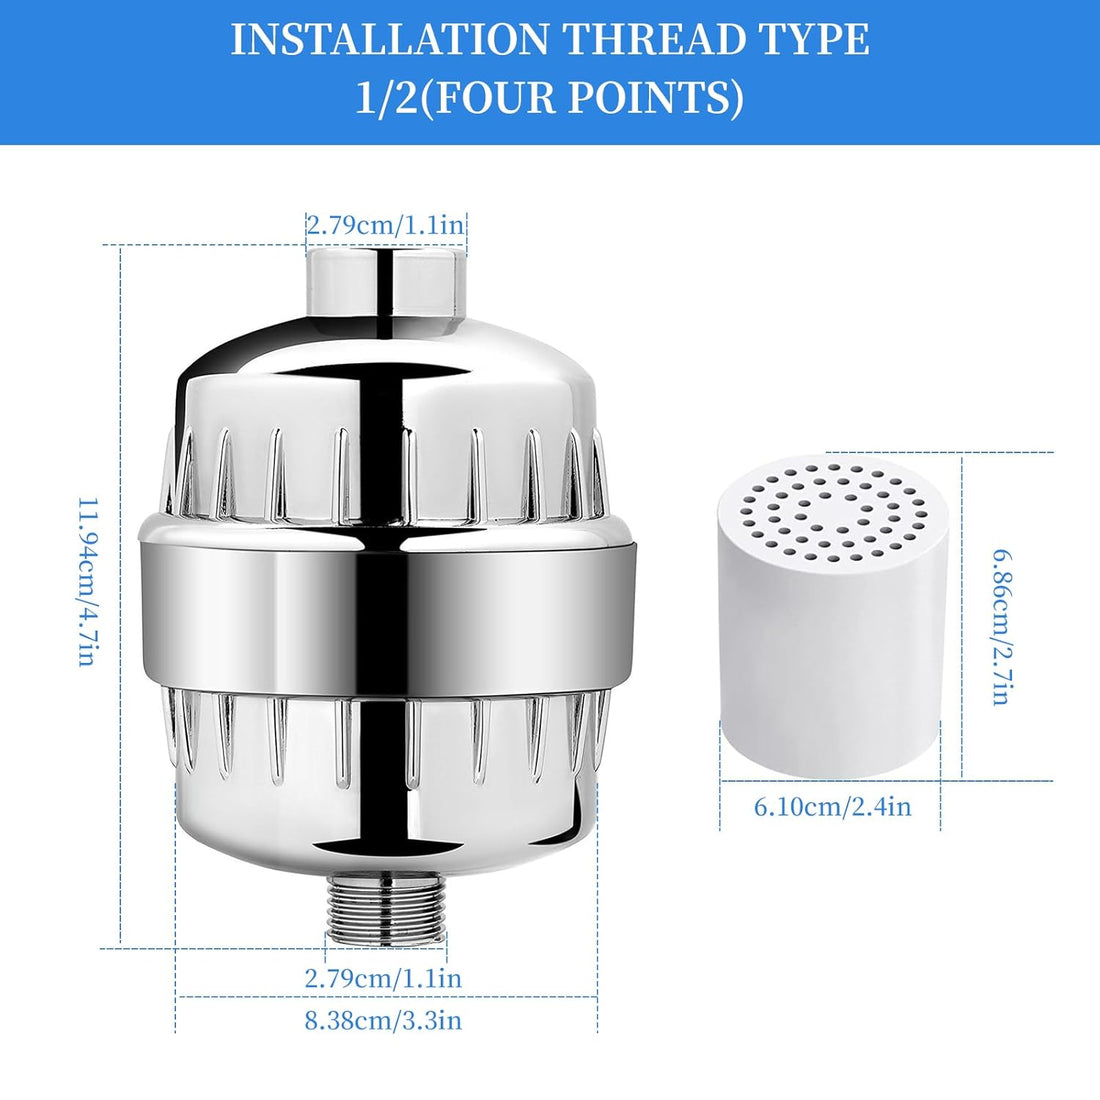 DZOMK High Output Revitalizing Shower Filter,Suitable for People with Sensitive and Dry Skin and Scalp, Filters Chlorine and Impurities,2 Cartridges Included Consistent Water Flow Showerhead Filter